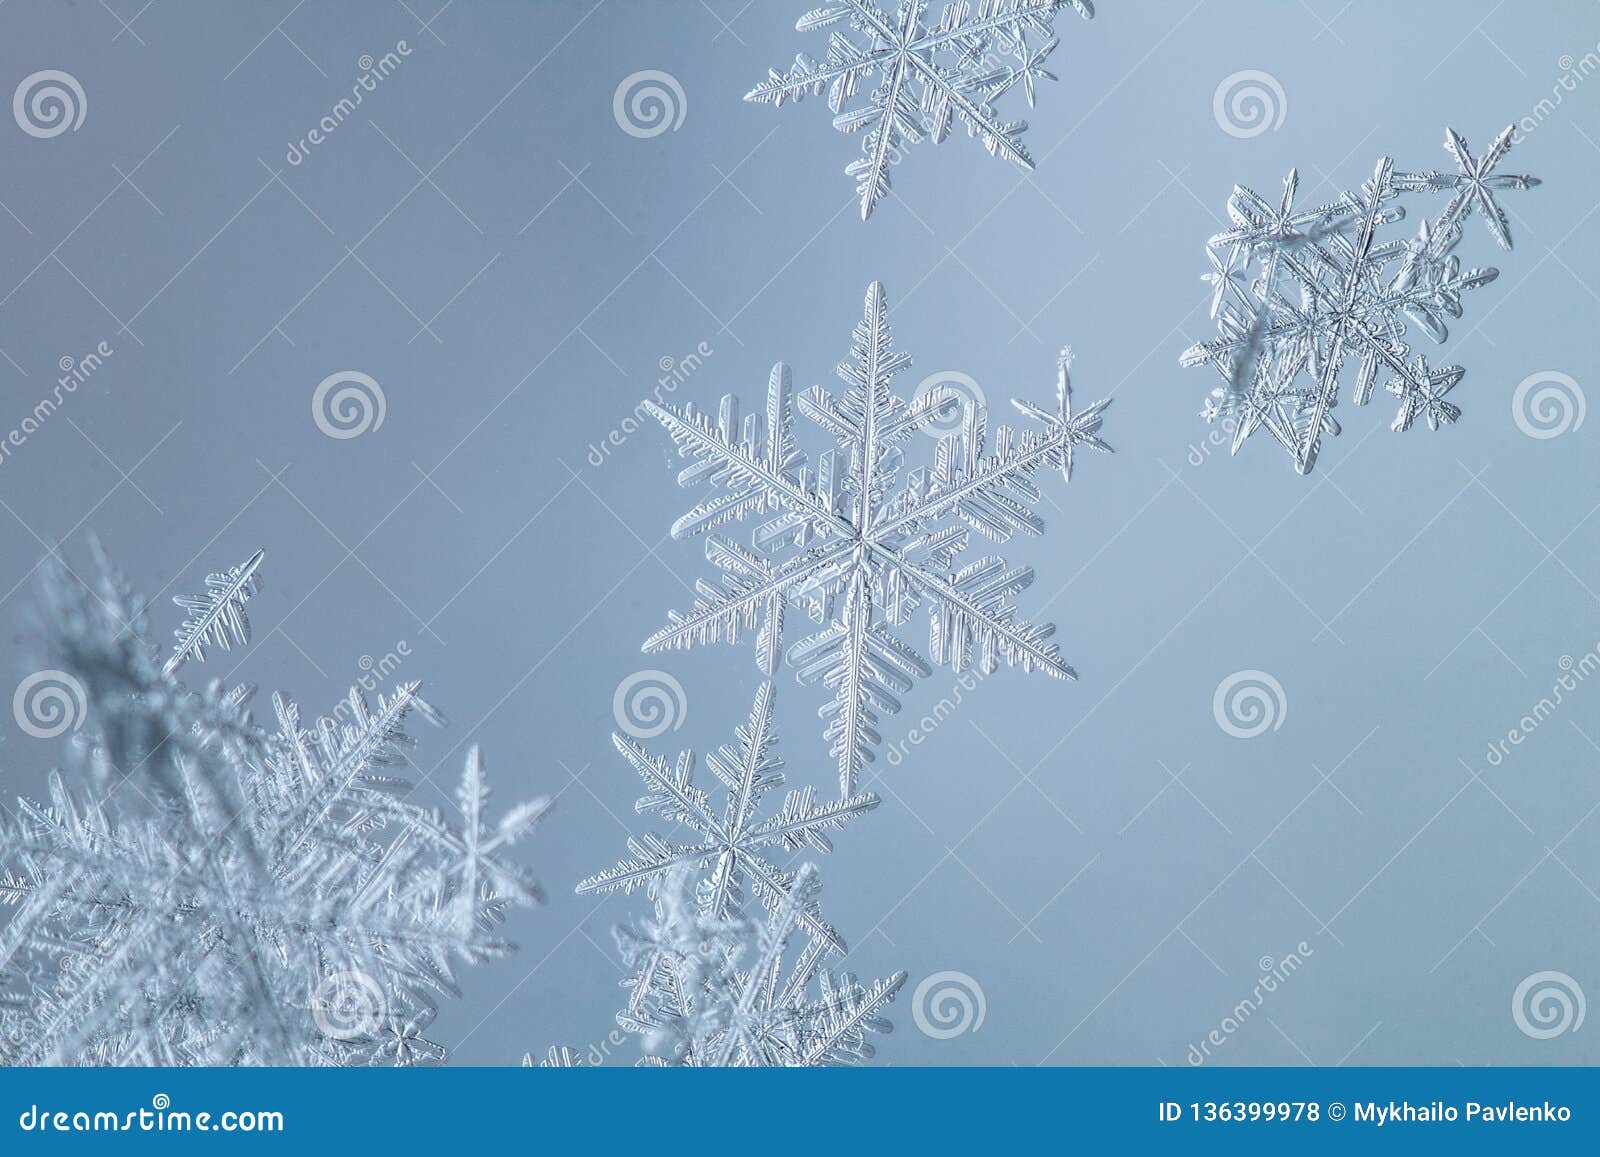 beautiful snow flake on a light blue background close up